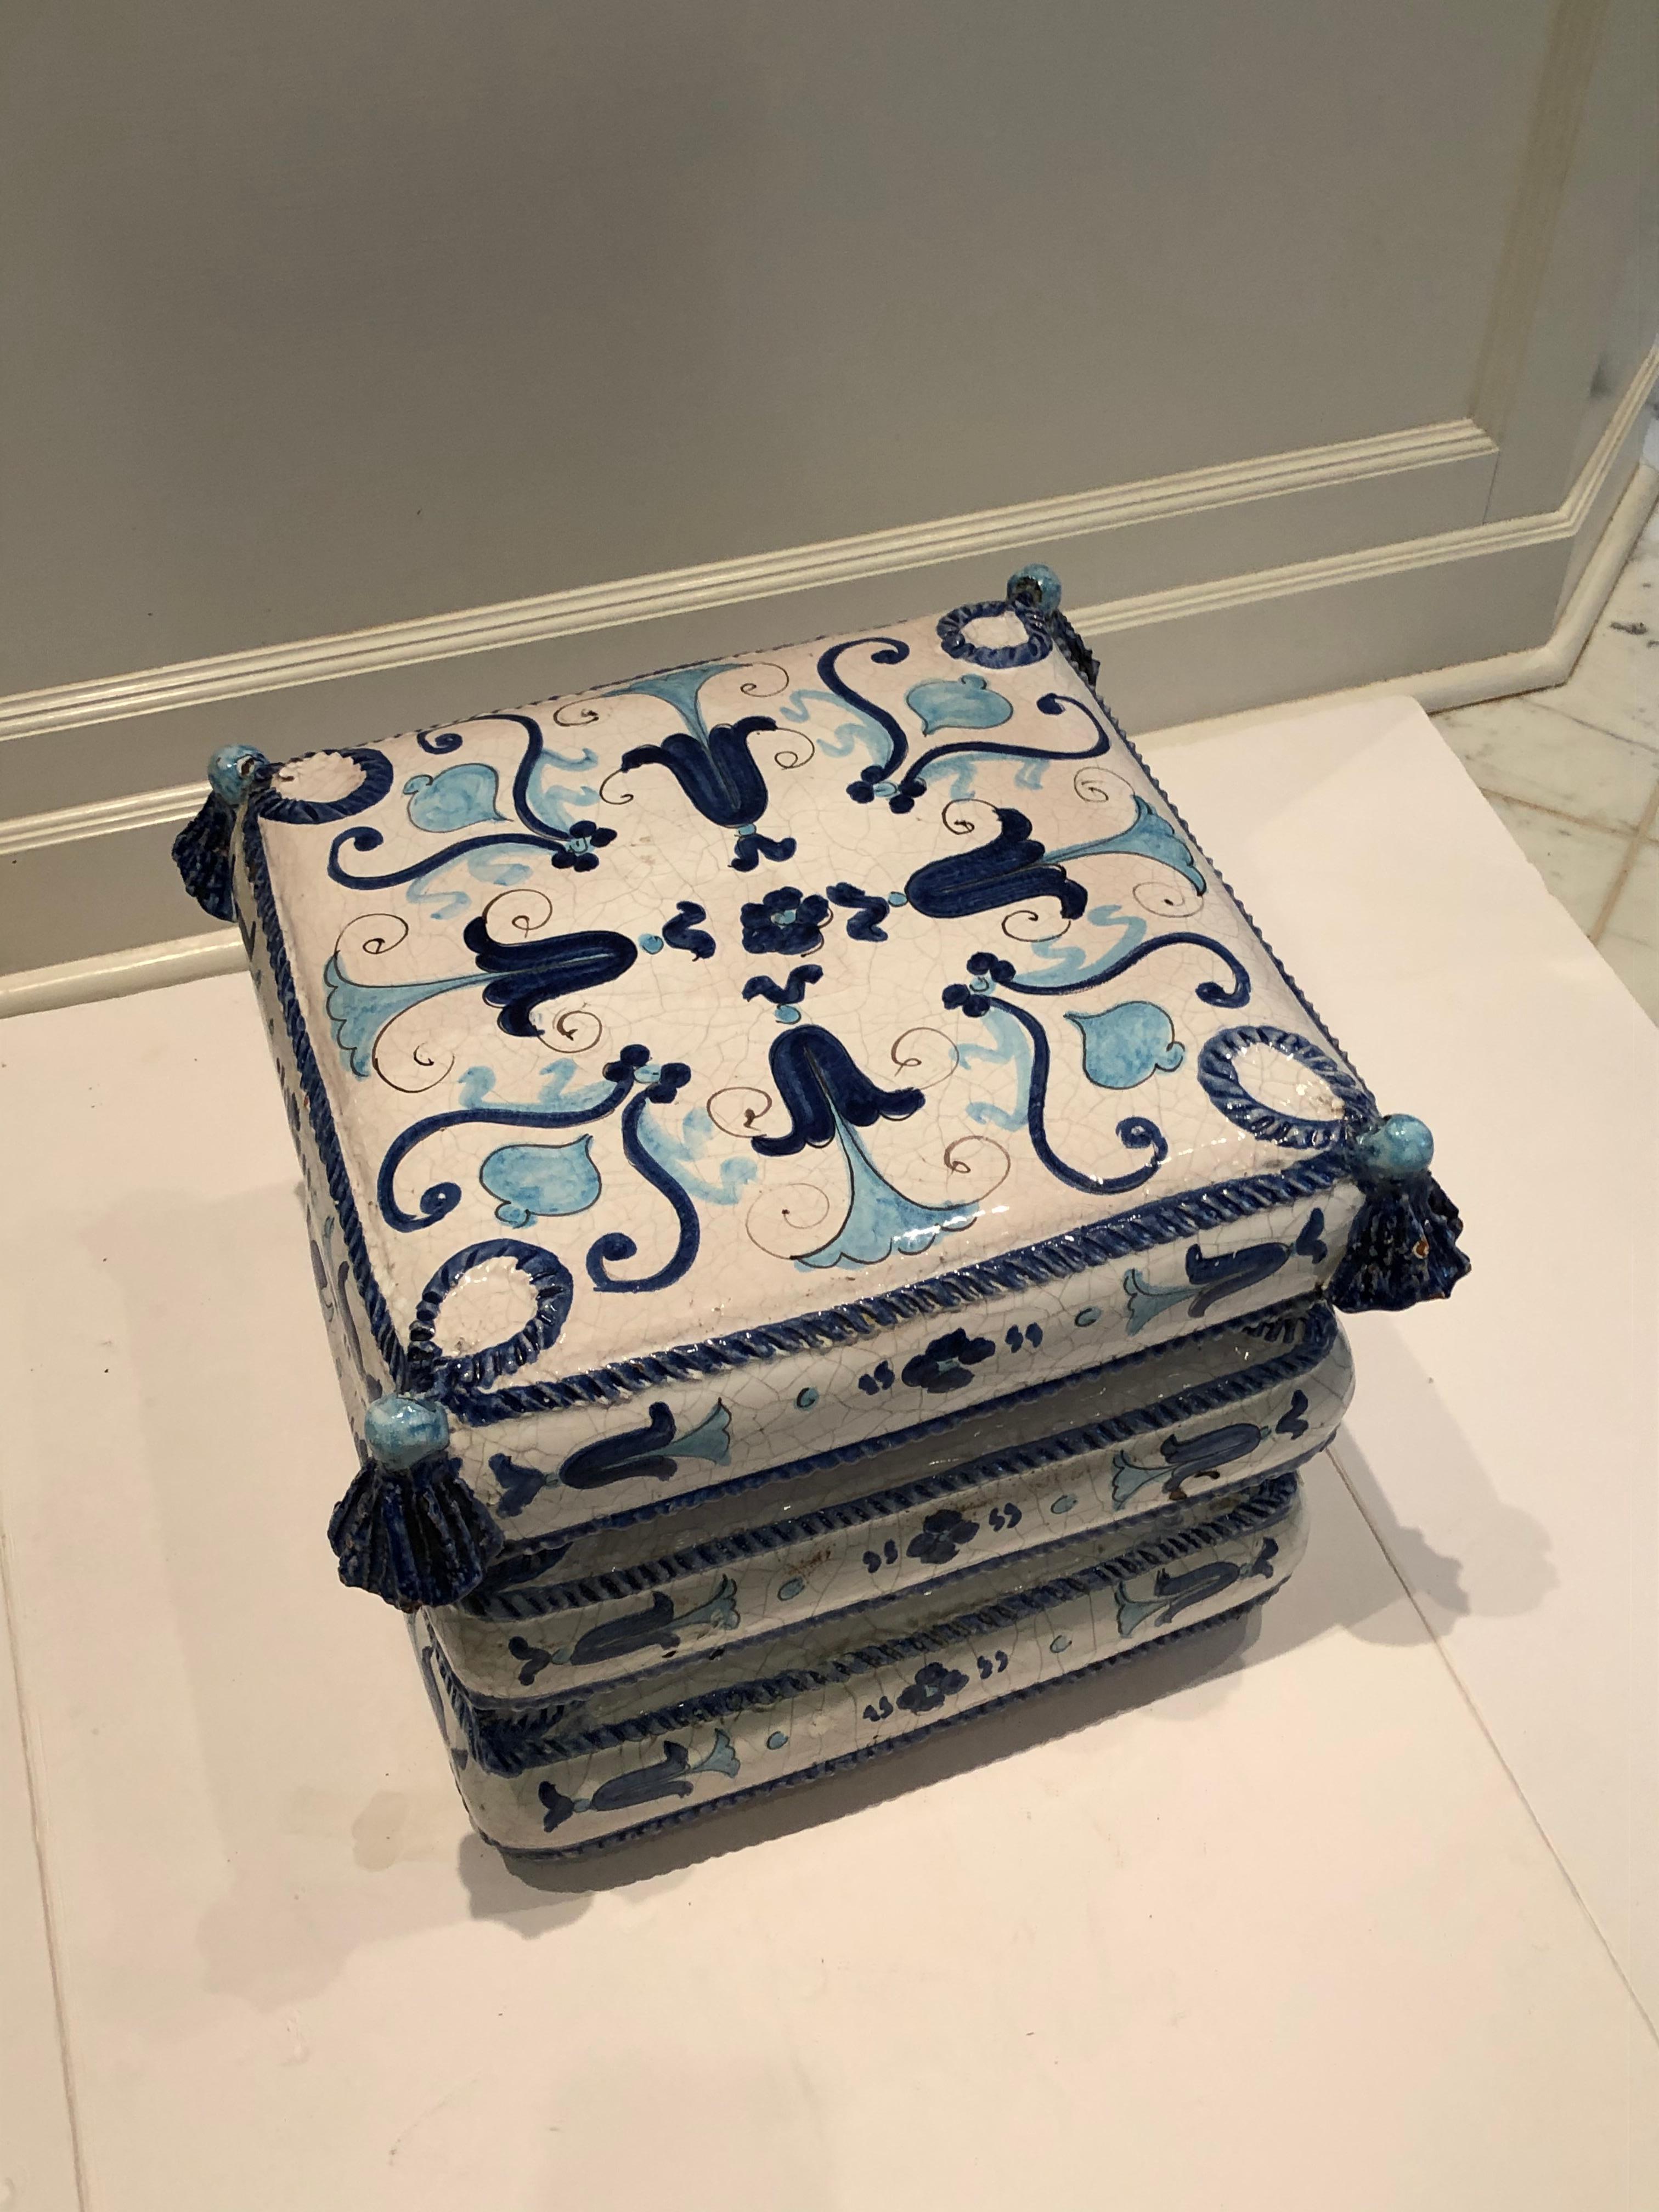 Stylish blue and white ceramic garden seat end table from Italy. Charming hand painted details in varying shades of blue which include bell flowers, roping and tassels. Lovely used indoors or on the patio.
       